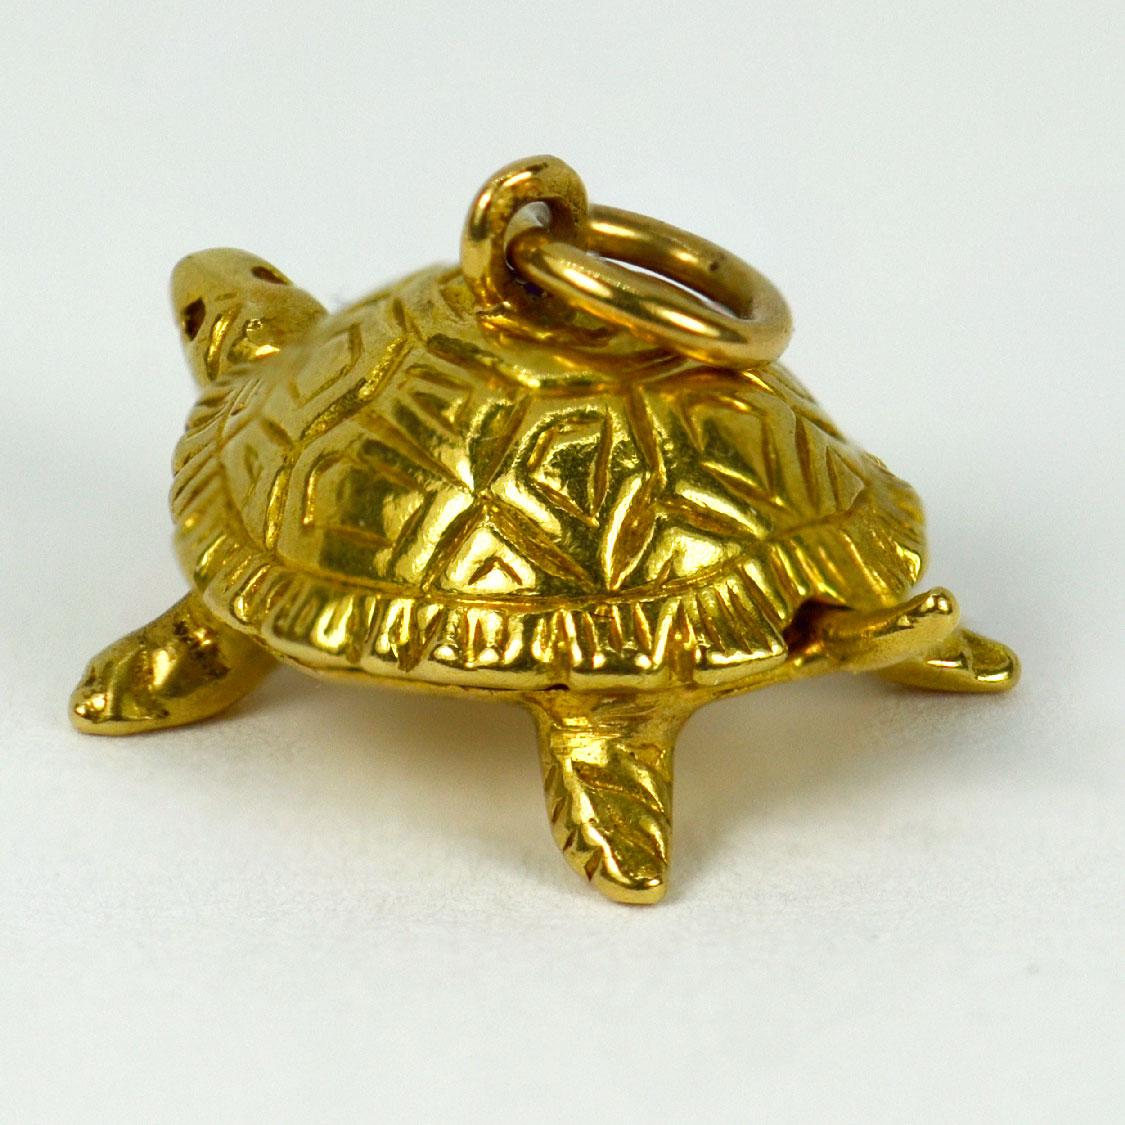 An 18 karat (18K) yellow gold charm pendant designed as a tortoise or turtle. Stamped with the owl mark for French import and 18 karat gold and an unknown makers mark.

Dimensions: 1 x 2 x 1.3 cm (not including jump ring)
Weight: 3.54 grams
